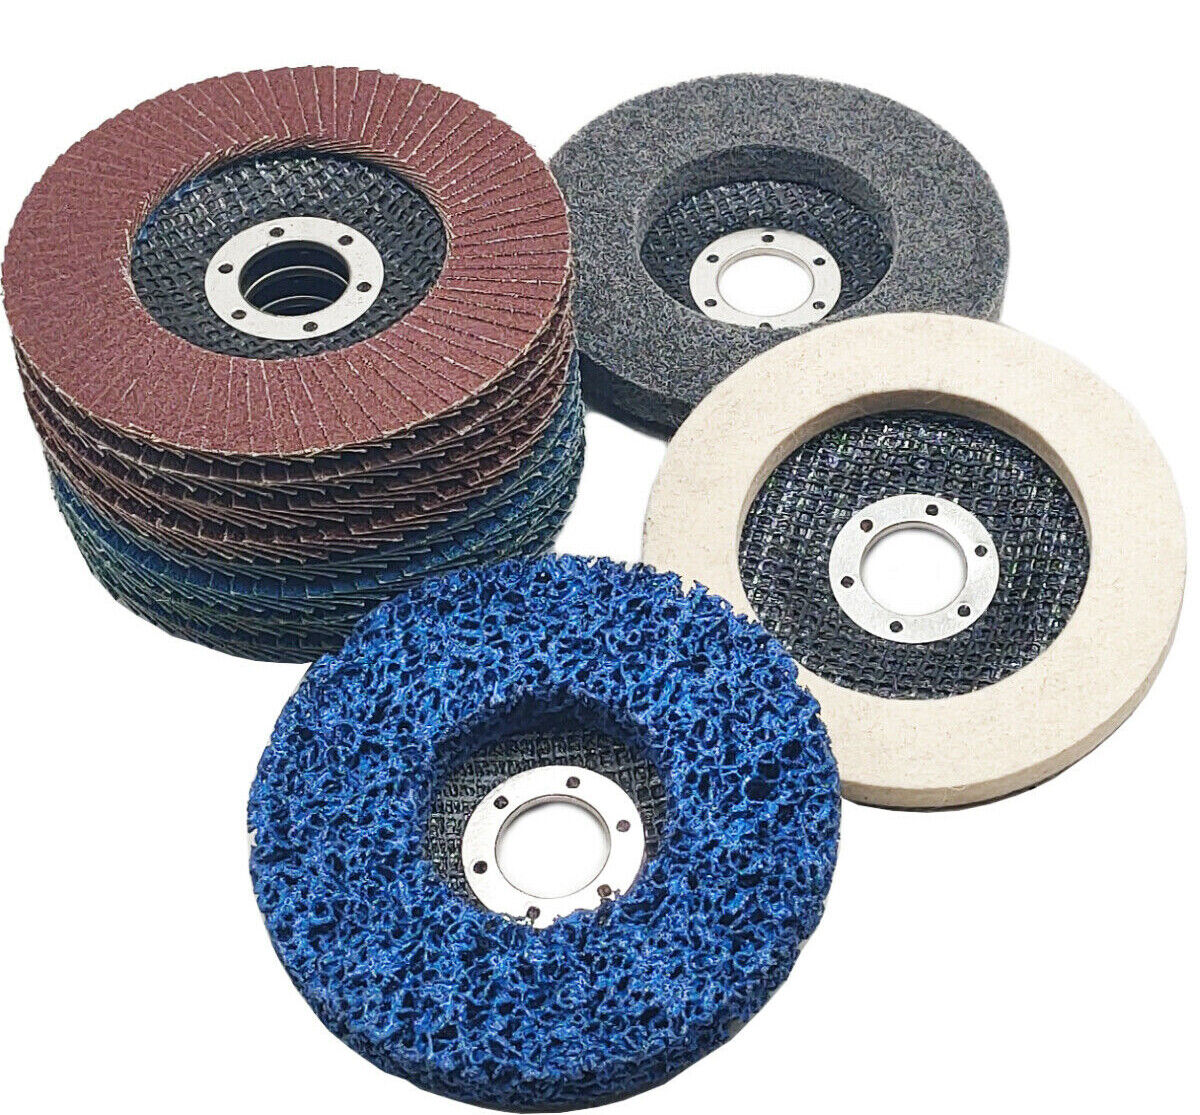 11x 4.5 Flap Disc 4-1/2" Sanding Grinding Stripping Polishing Wheels for Grinder Satc Does Not Apply